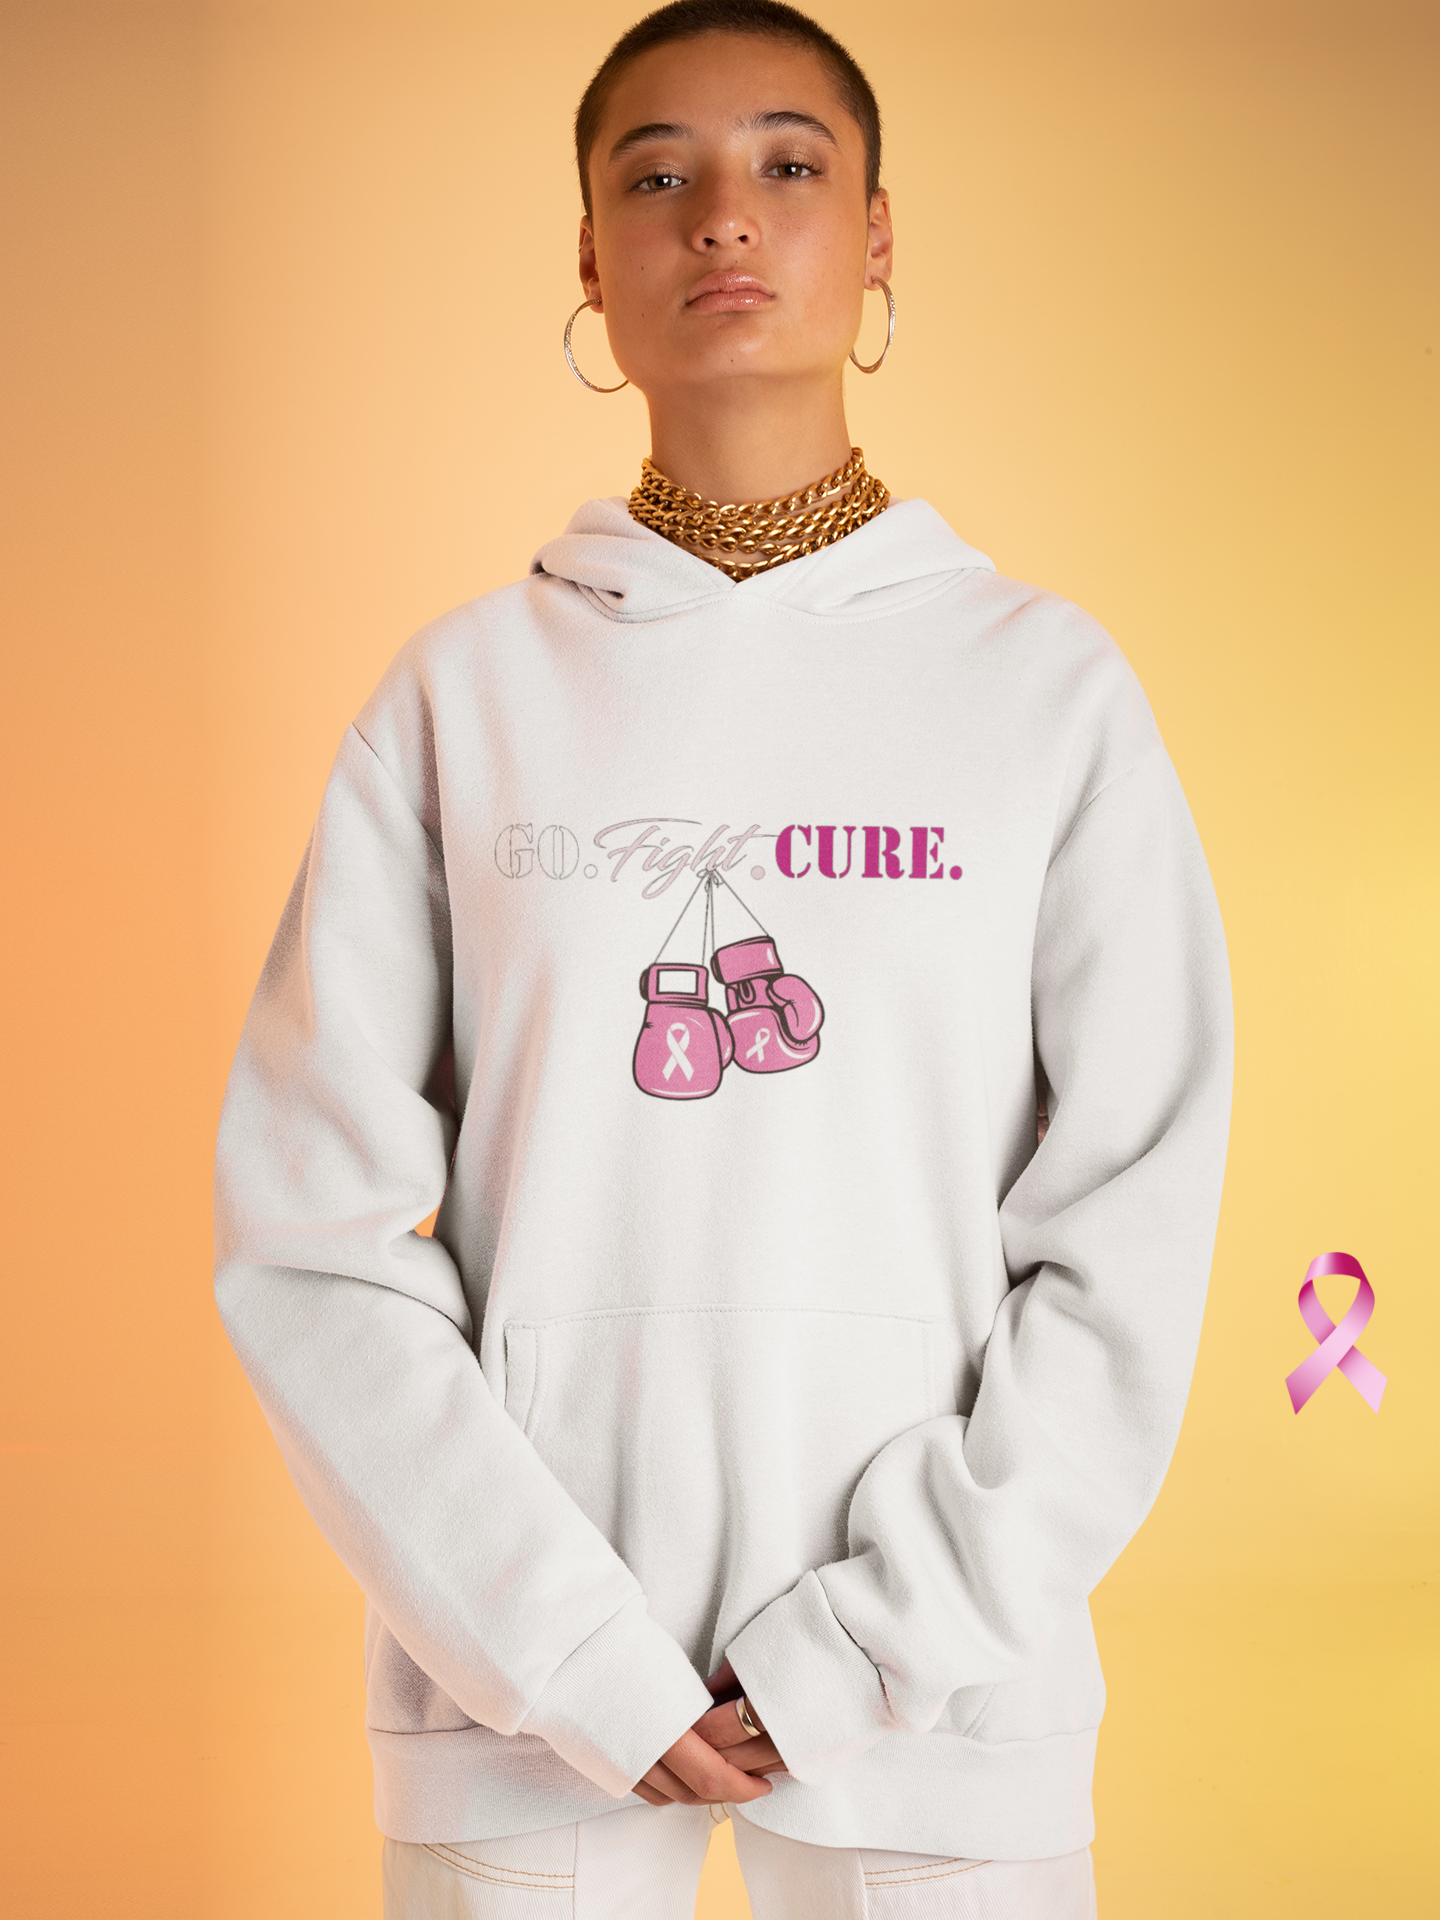 Go.Fight.Cure.